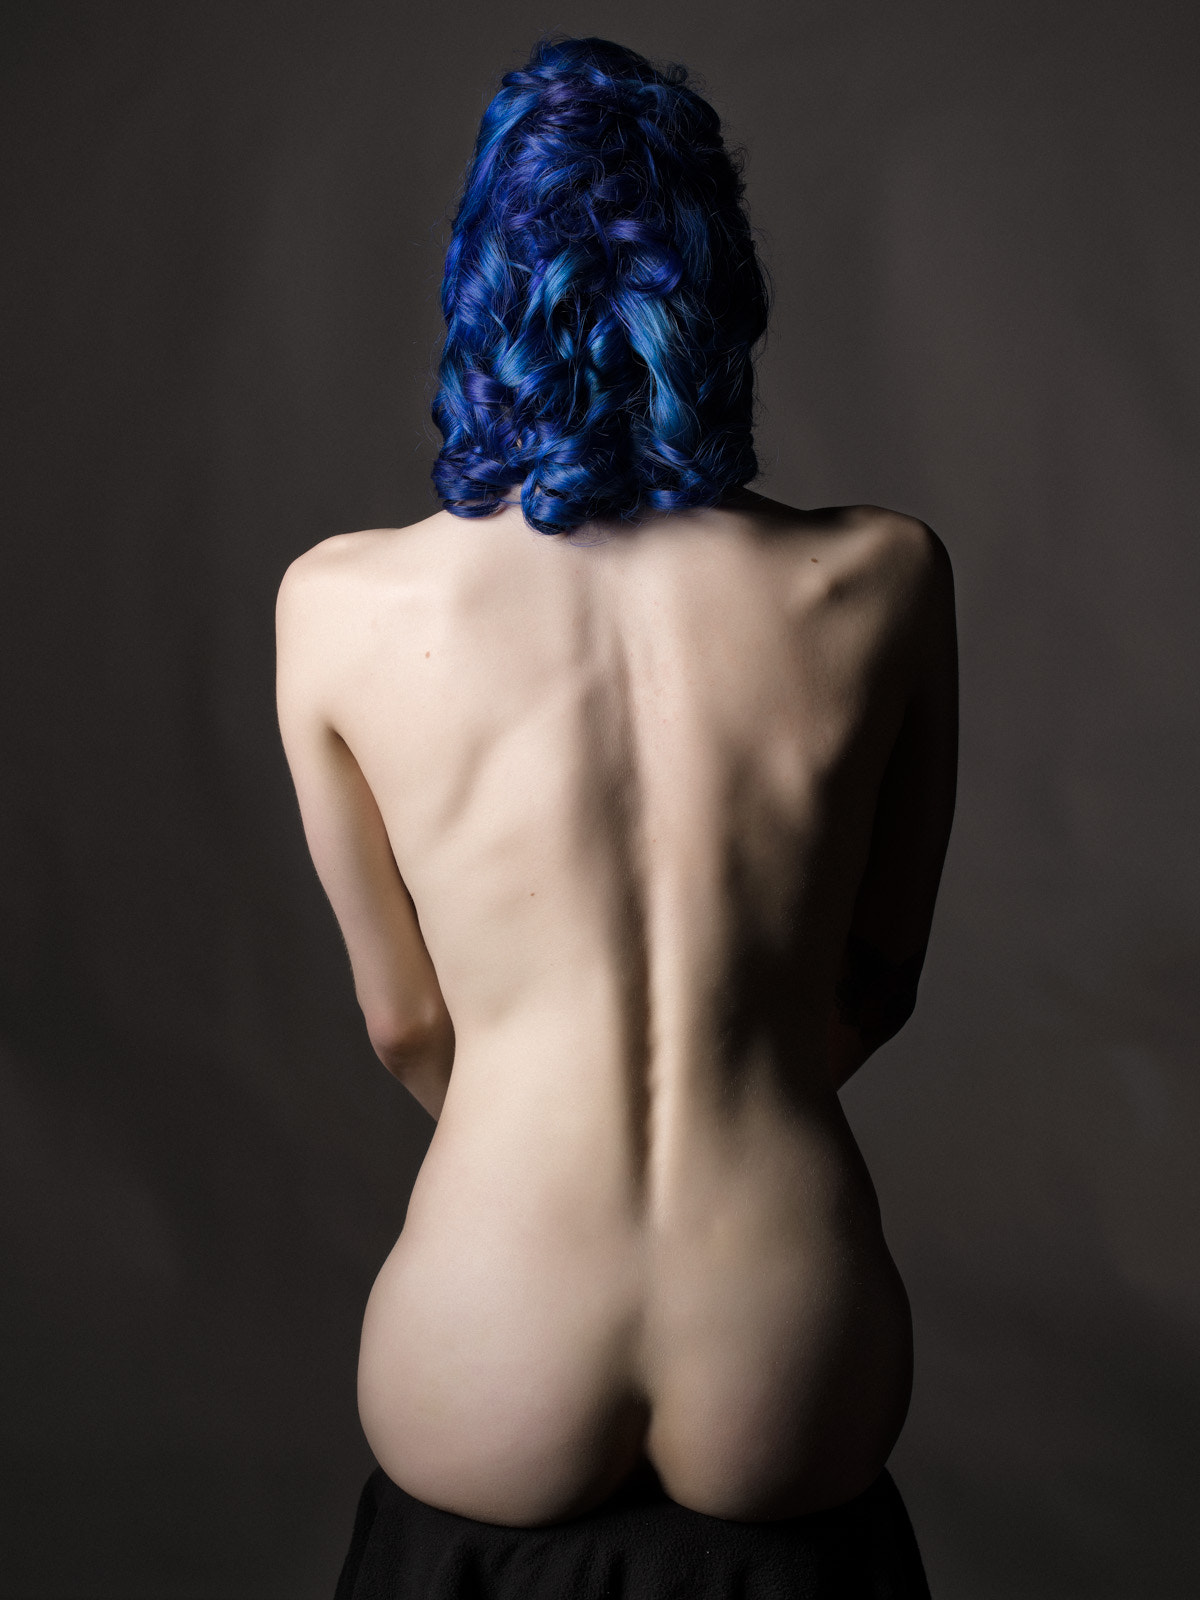 Pentax 645Z sample photo. Camille nude study #2 photography